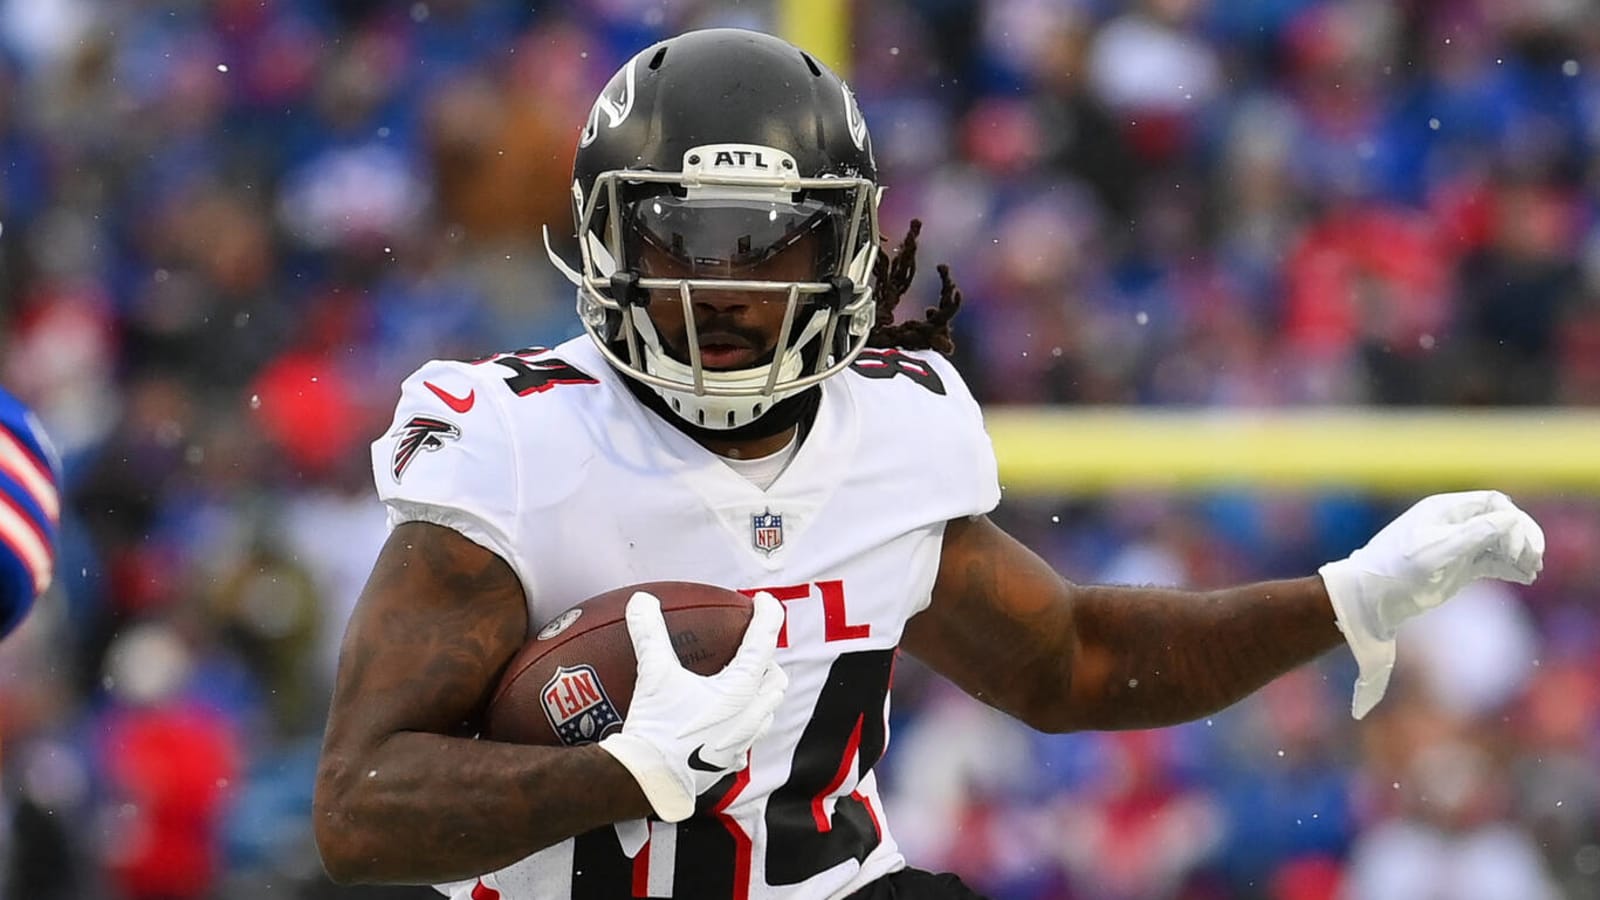 Cordarrelle Patterson re-signs with Falcons after career year